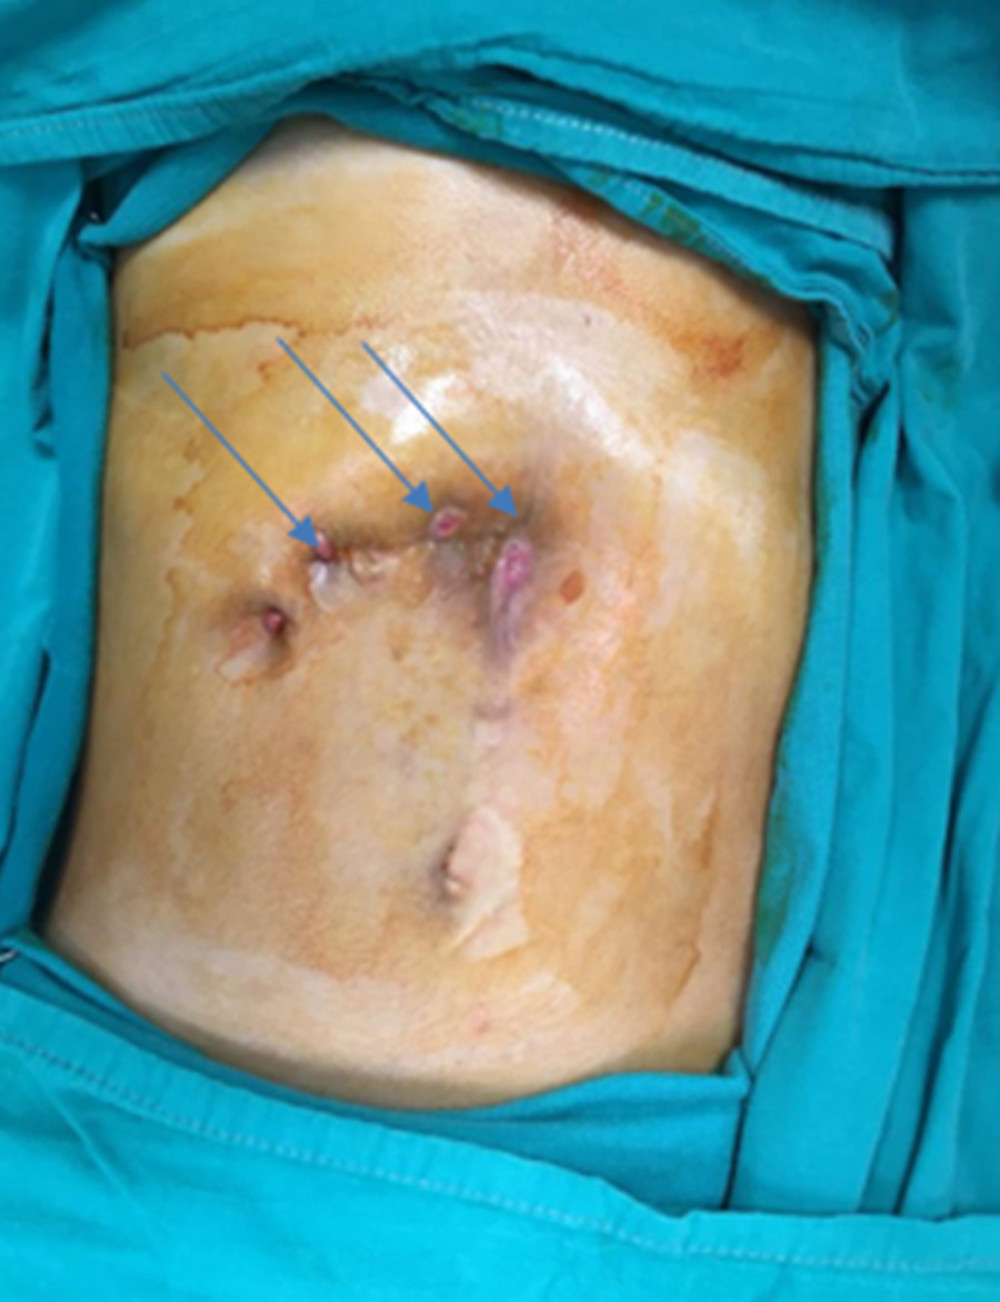 The arrows show the fistula openings.